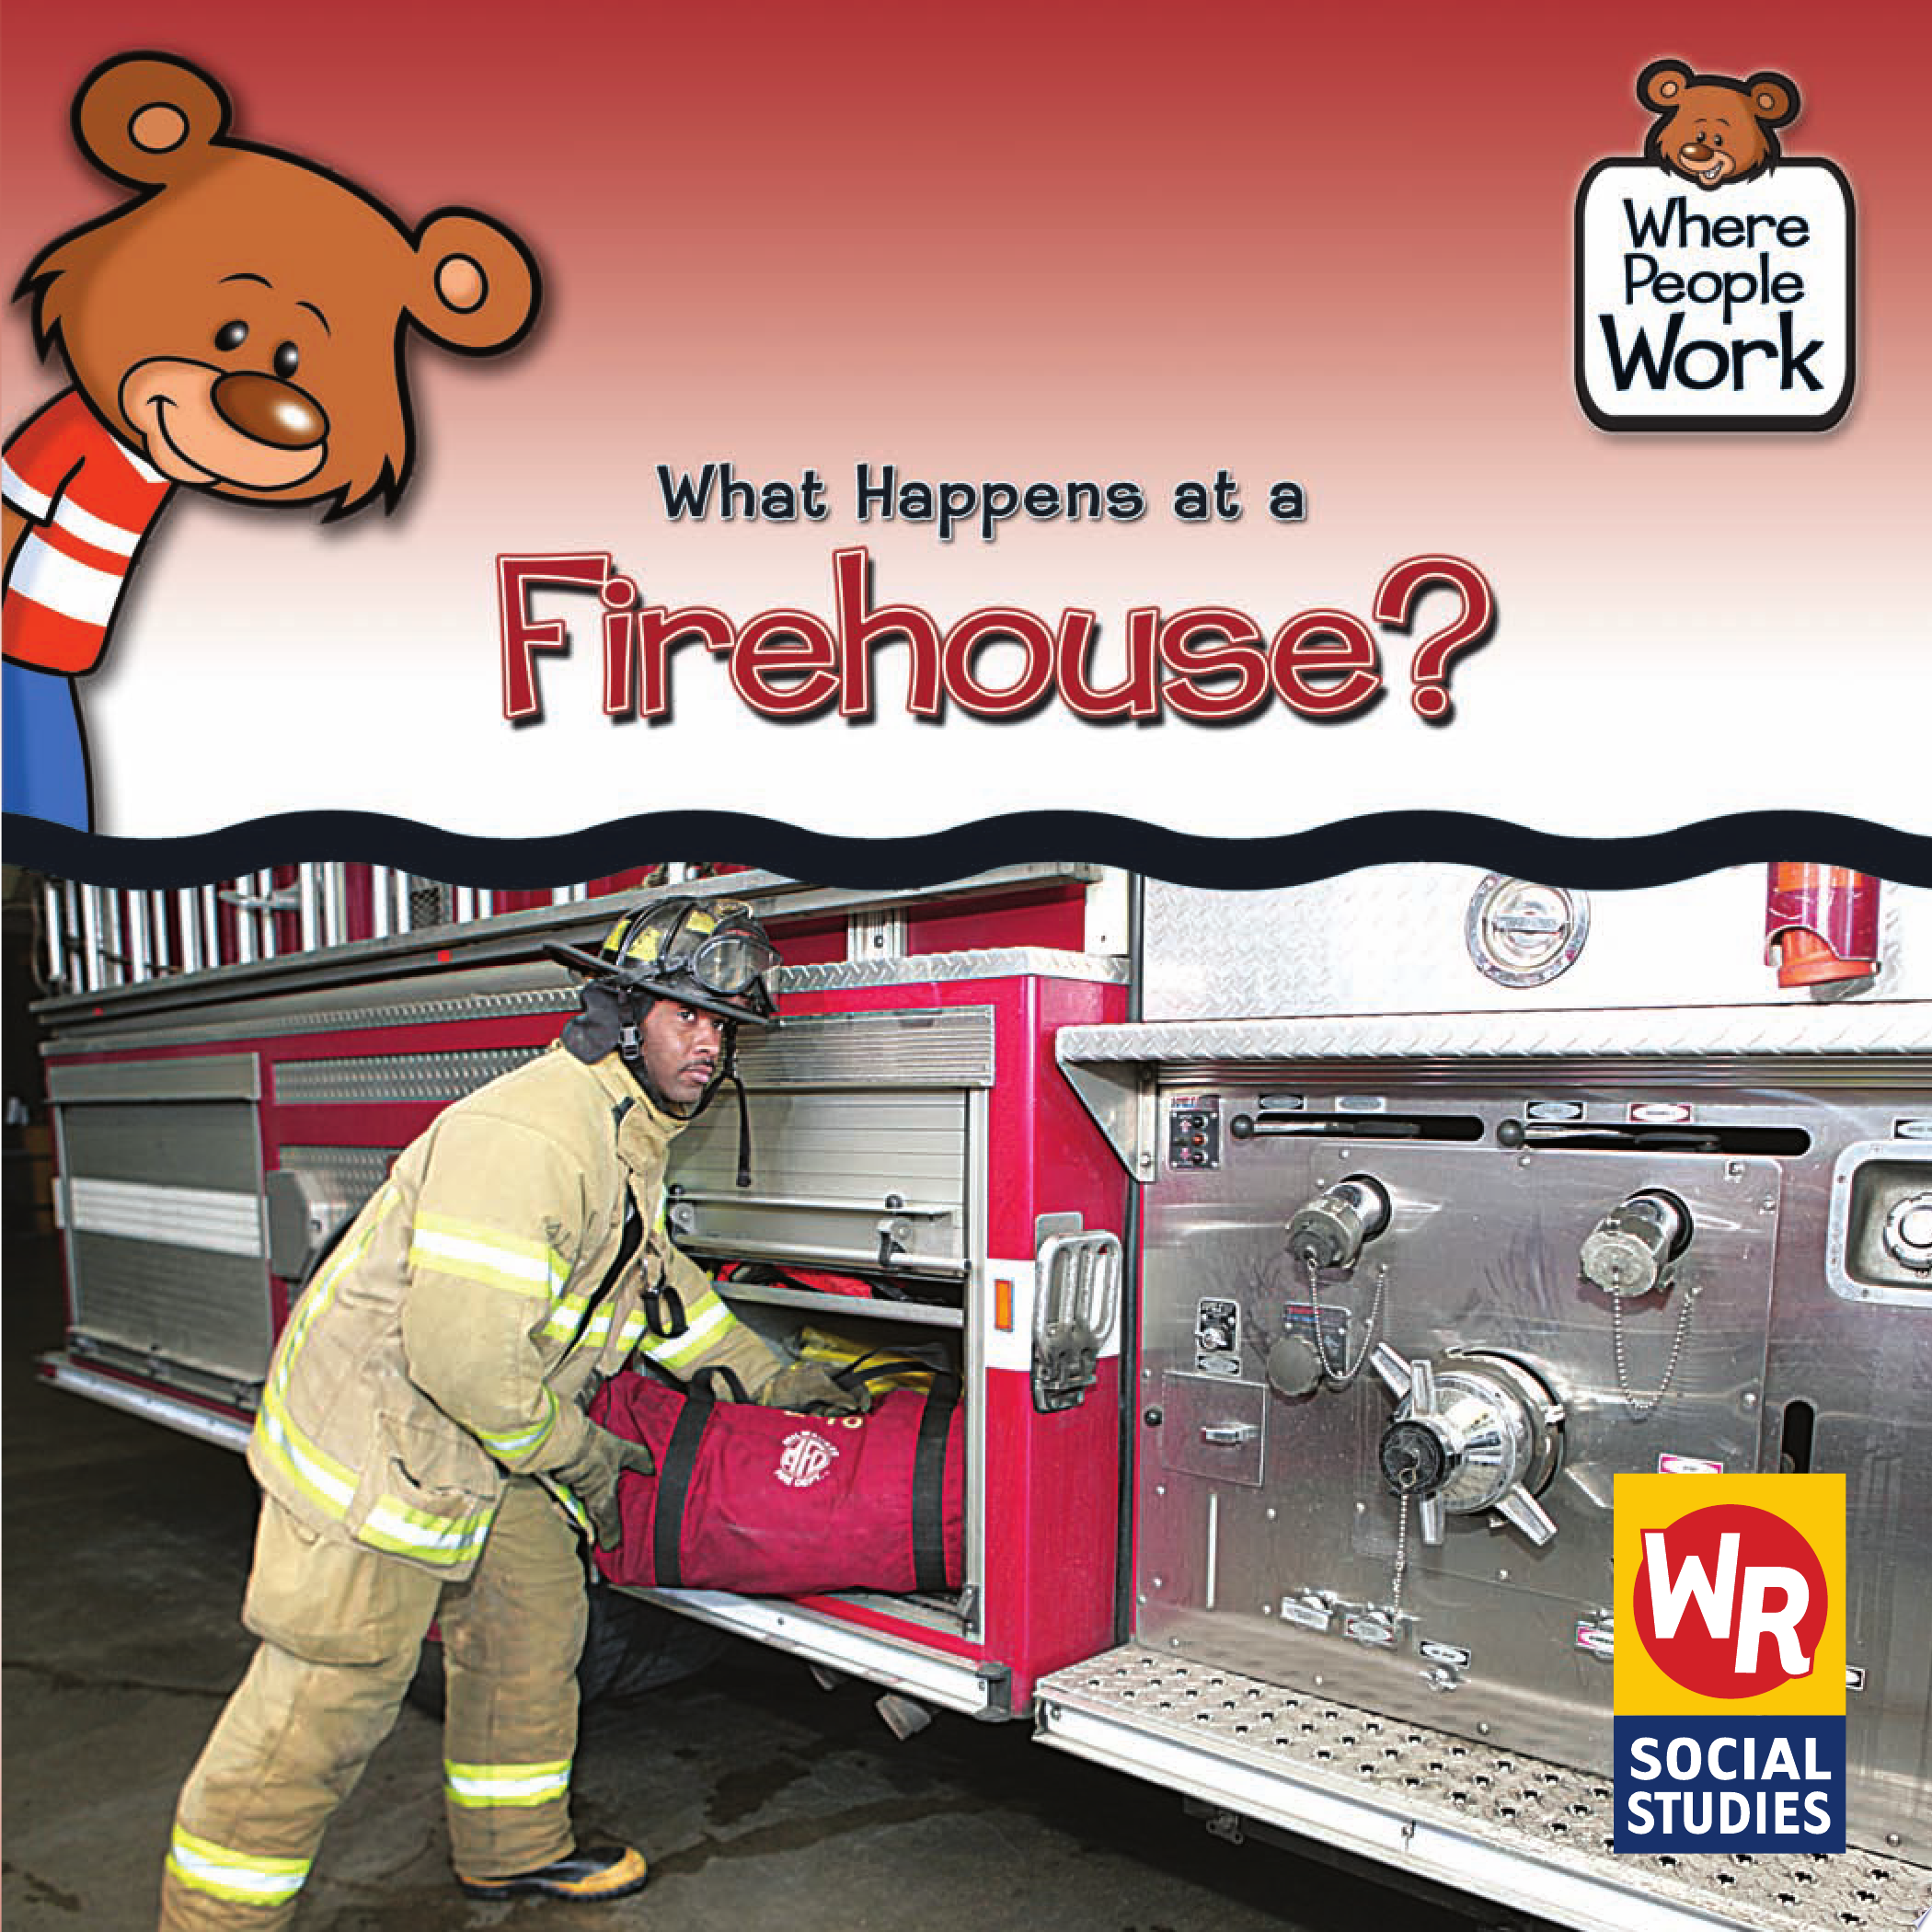 Image for "What Happens at a Firehouse?"